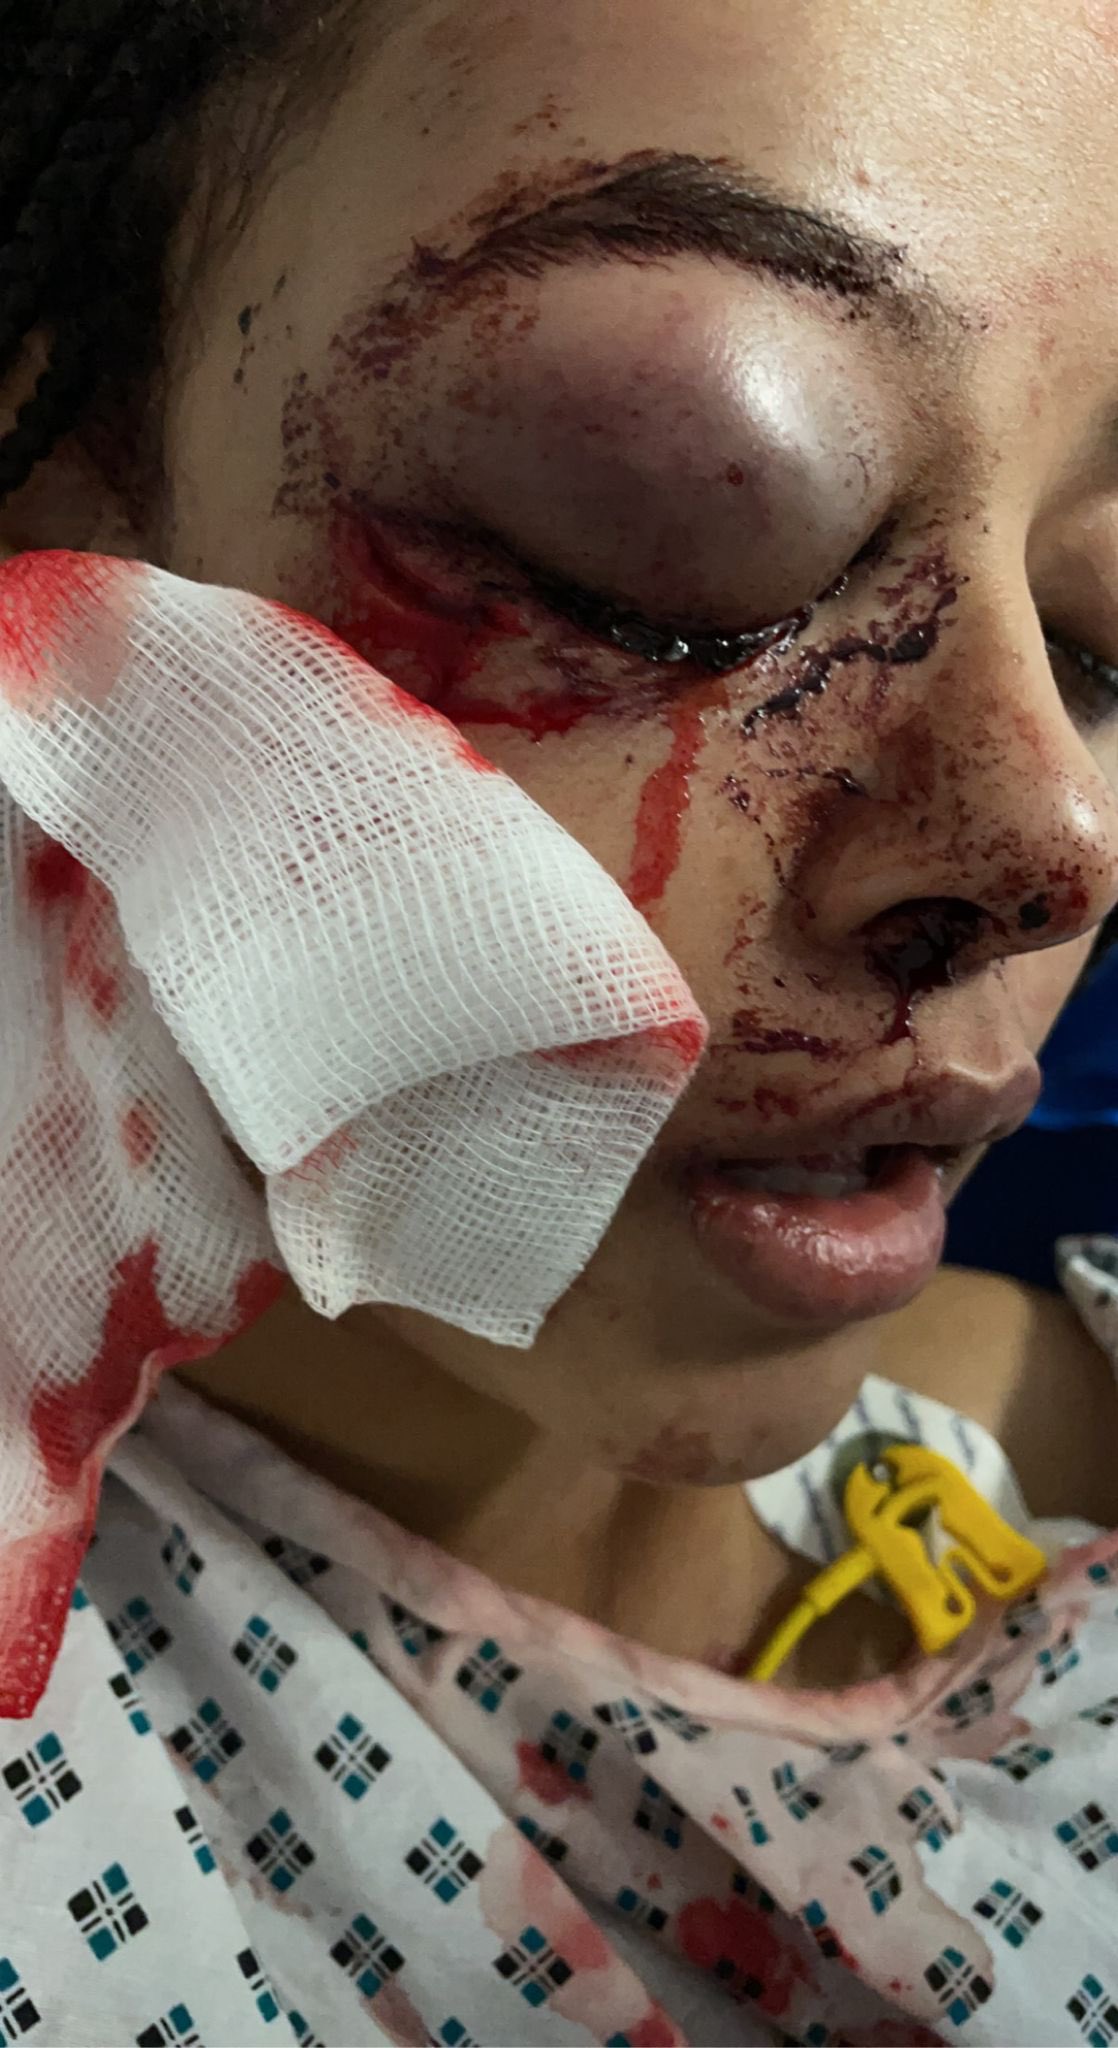 Alanna Quinn Idris was seriously injured in the assault